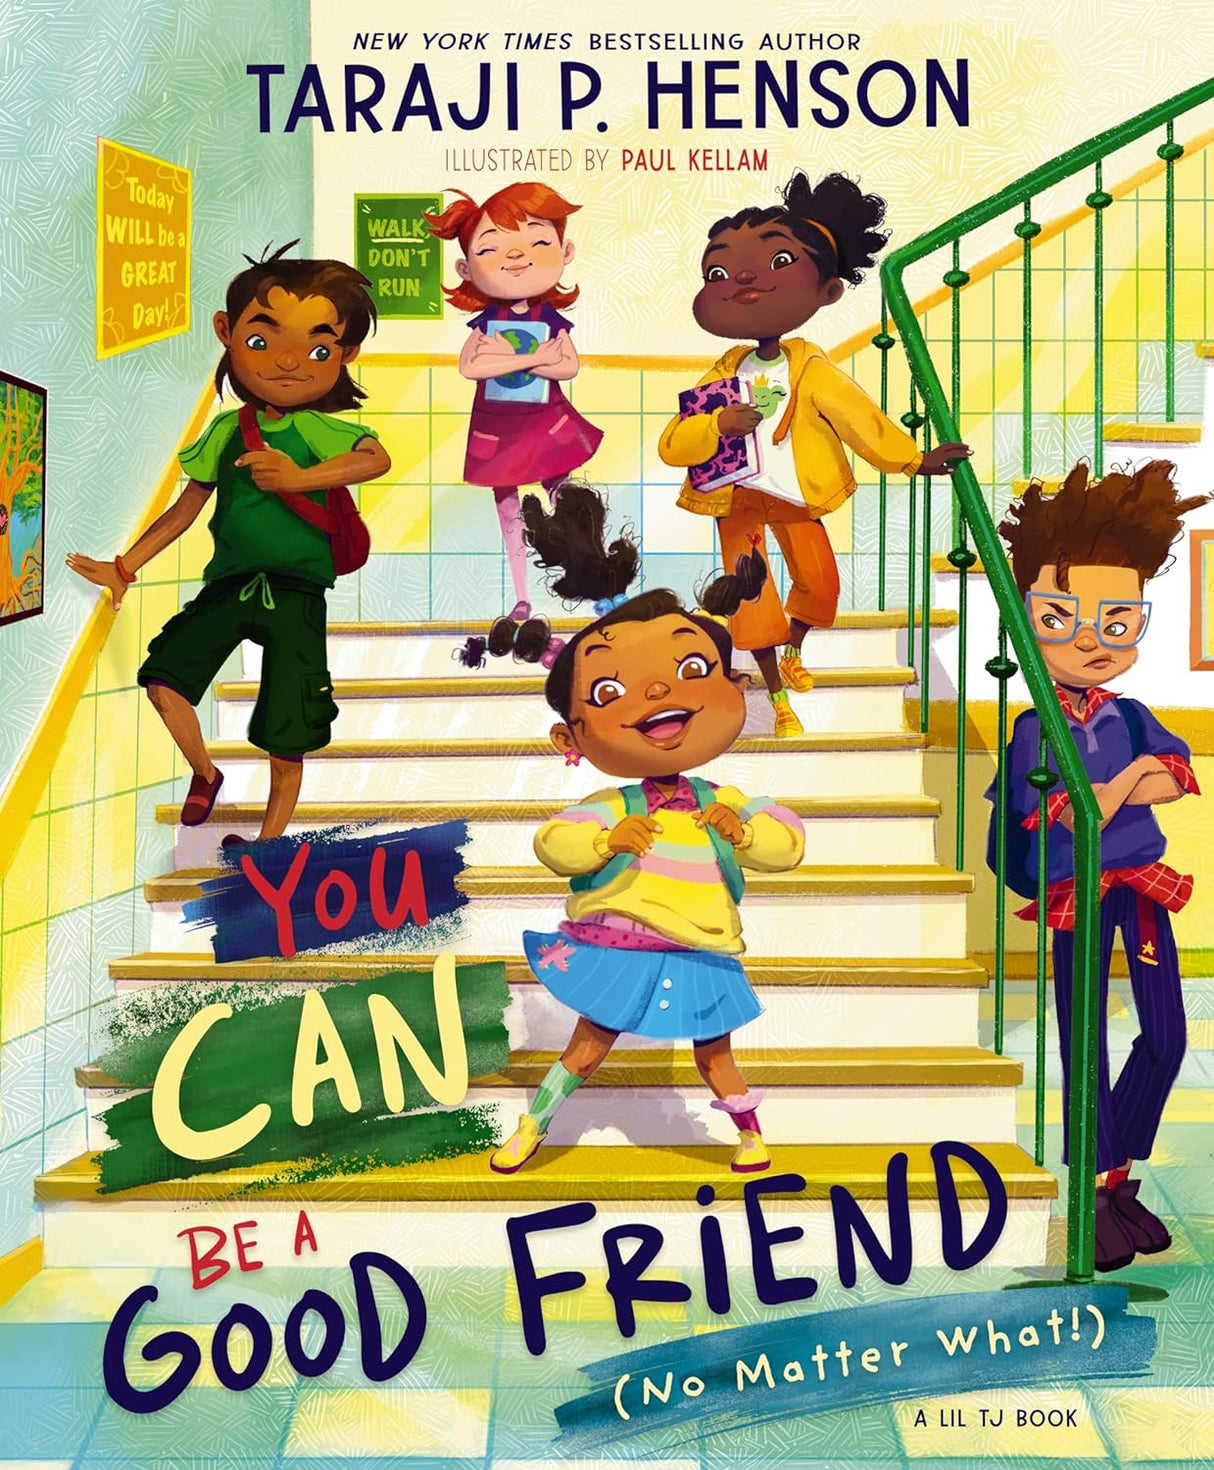 You Can Be a Good Friend (No Matter What!): A Lil Tj Book